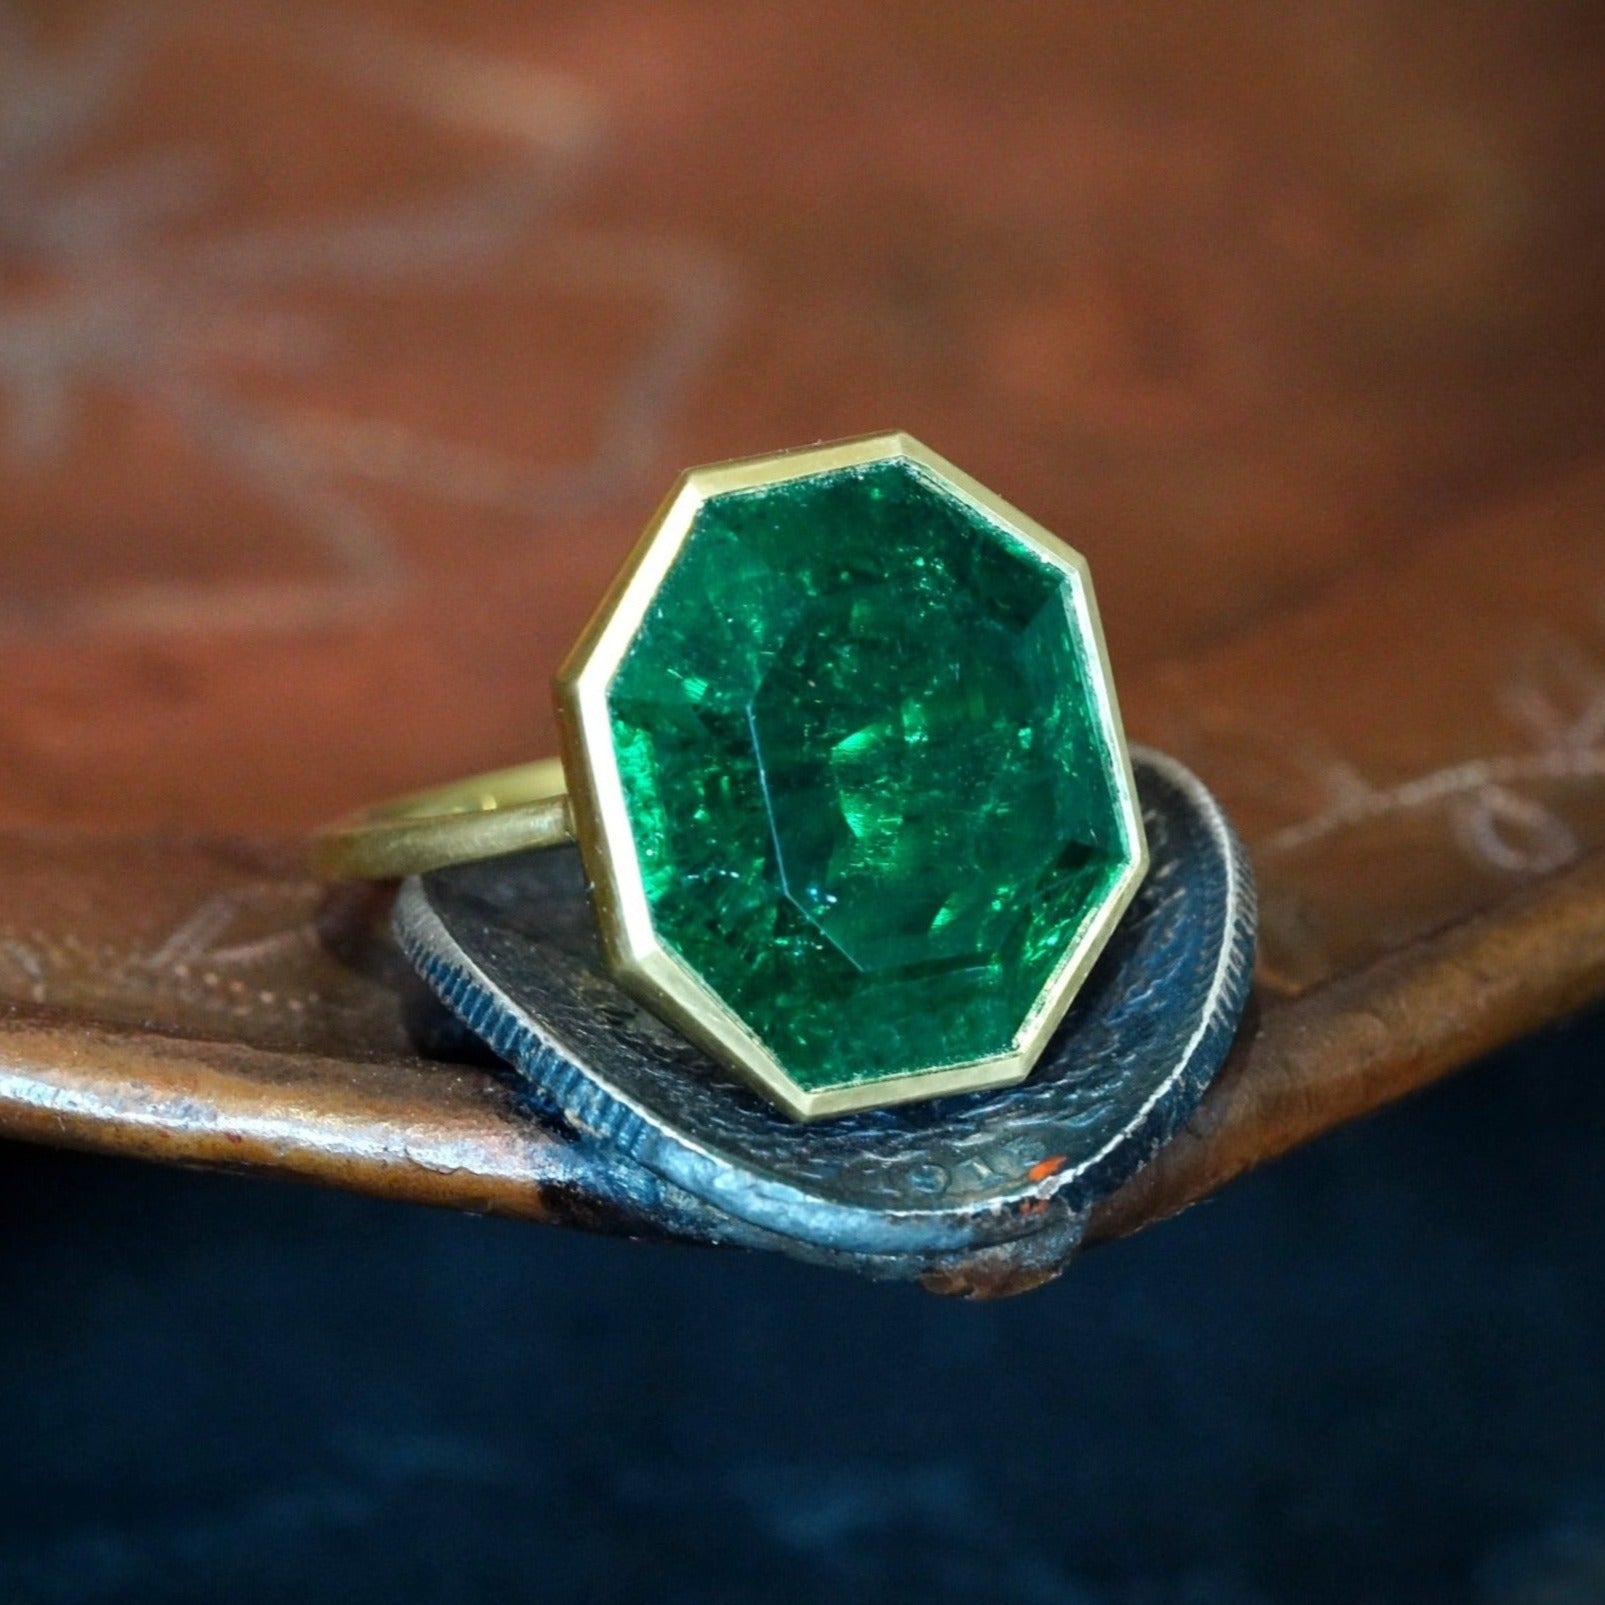 20K Gold Ring with 10.97 Carat Step Cut Colombian Emerald